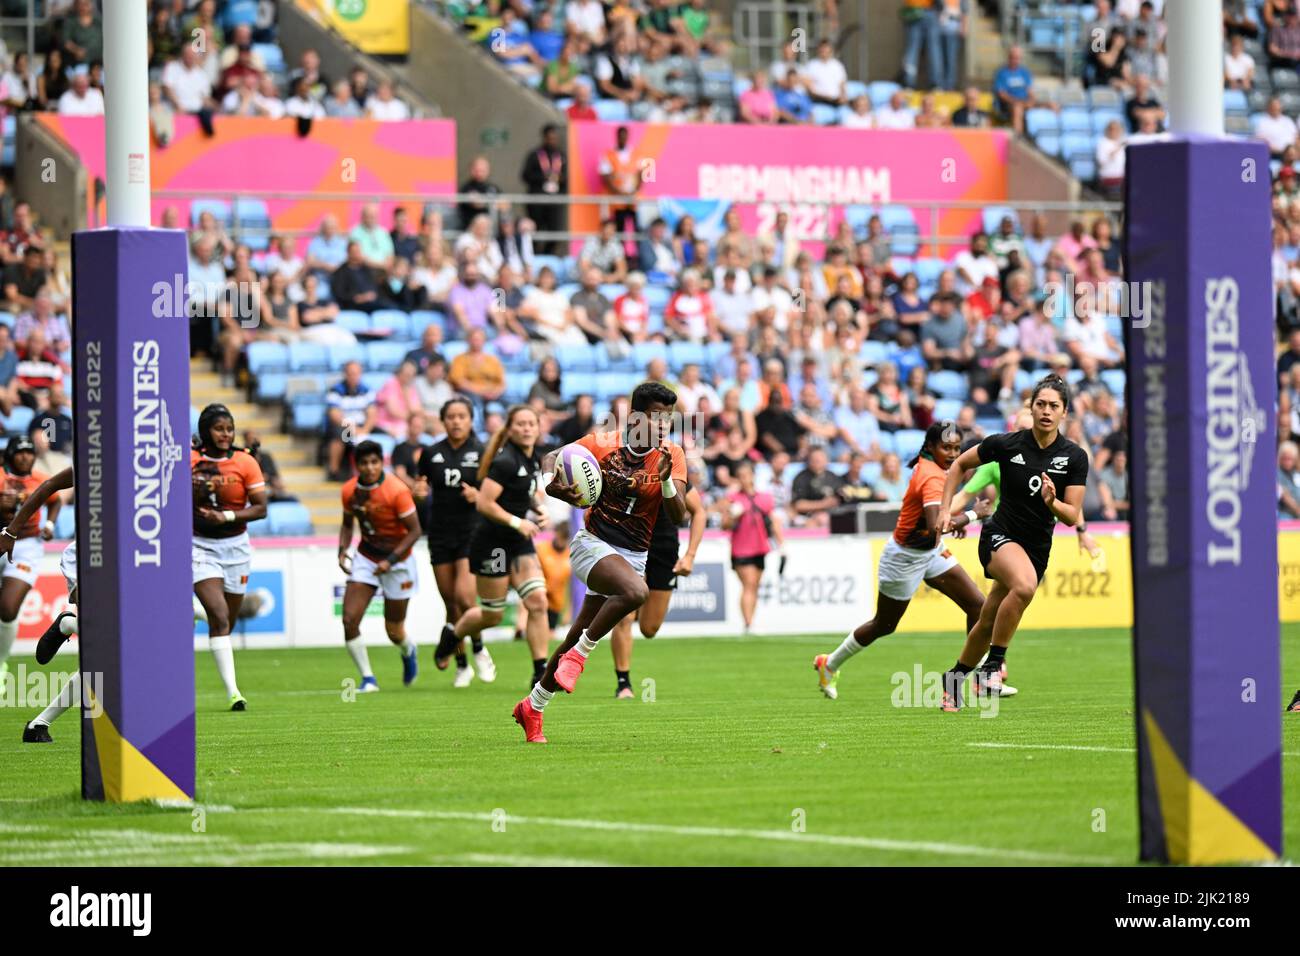 Dulani Pallikkondage of Sri Lanka takes on the All Blacks during the Rugby Sevens at the Commonwealth Games at Coventry Stadium on Friday 29th July 2022. Credit: MI News & Sport /Alamy Live News Stock Photo